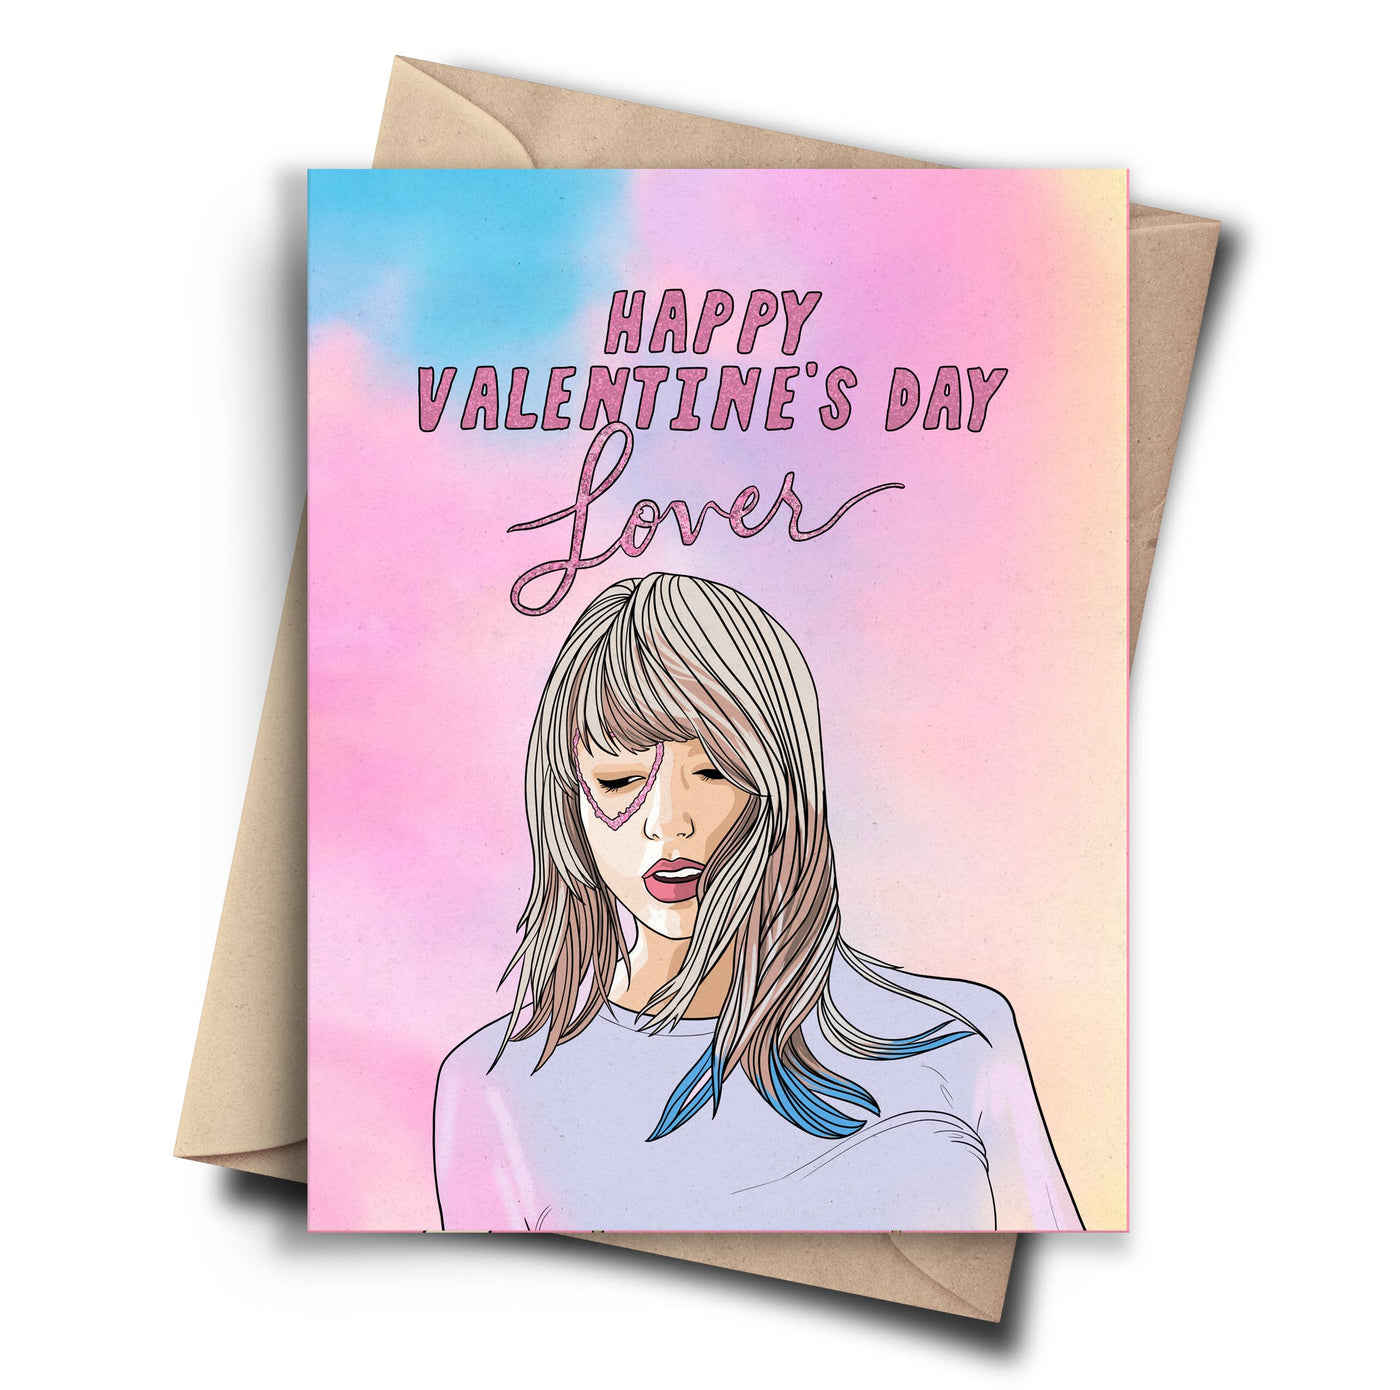 Lover Valentine Card - Taylor Swift Card (SALE) - The Local Space